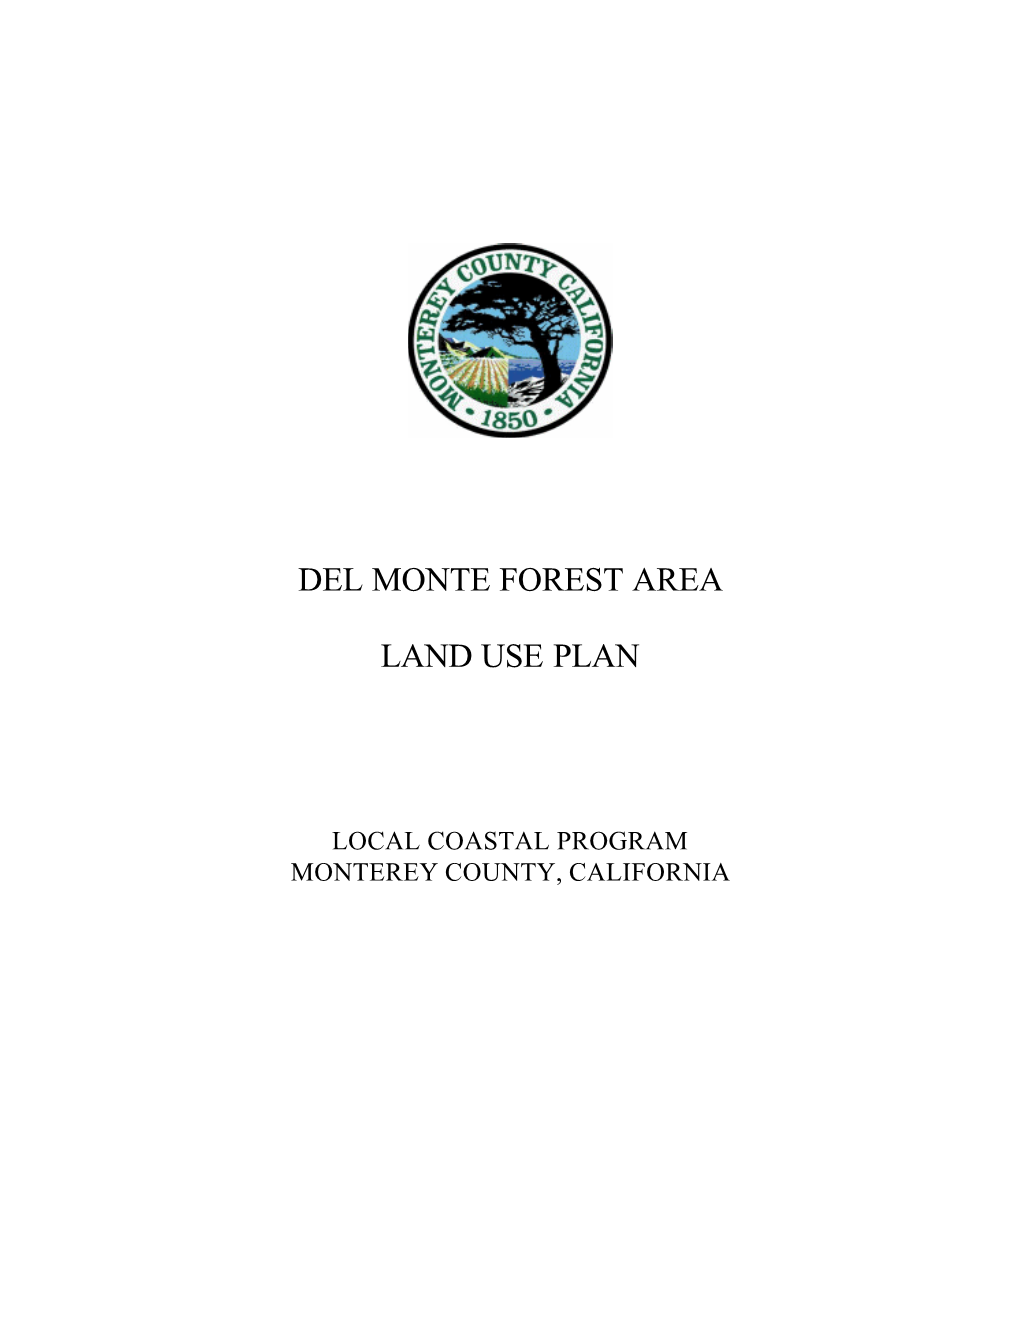 Del Monte Forest Area Land Use Plan